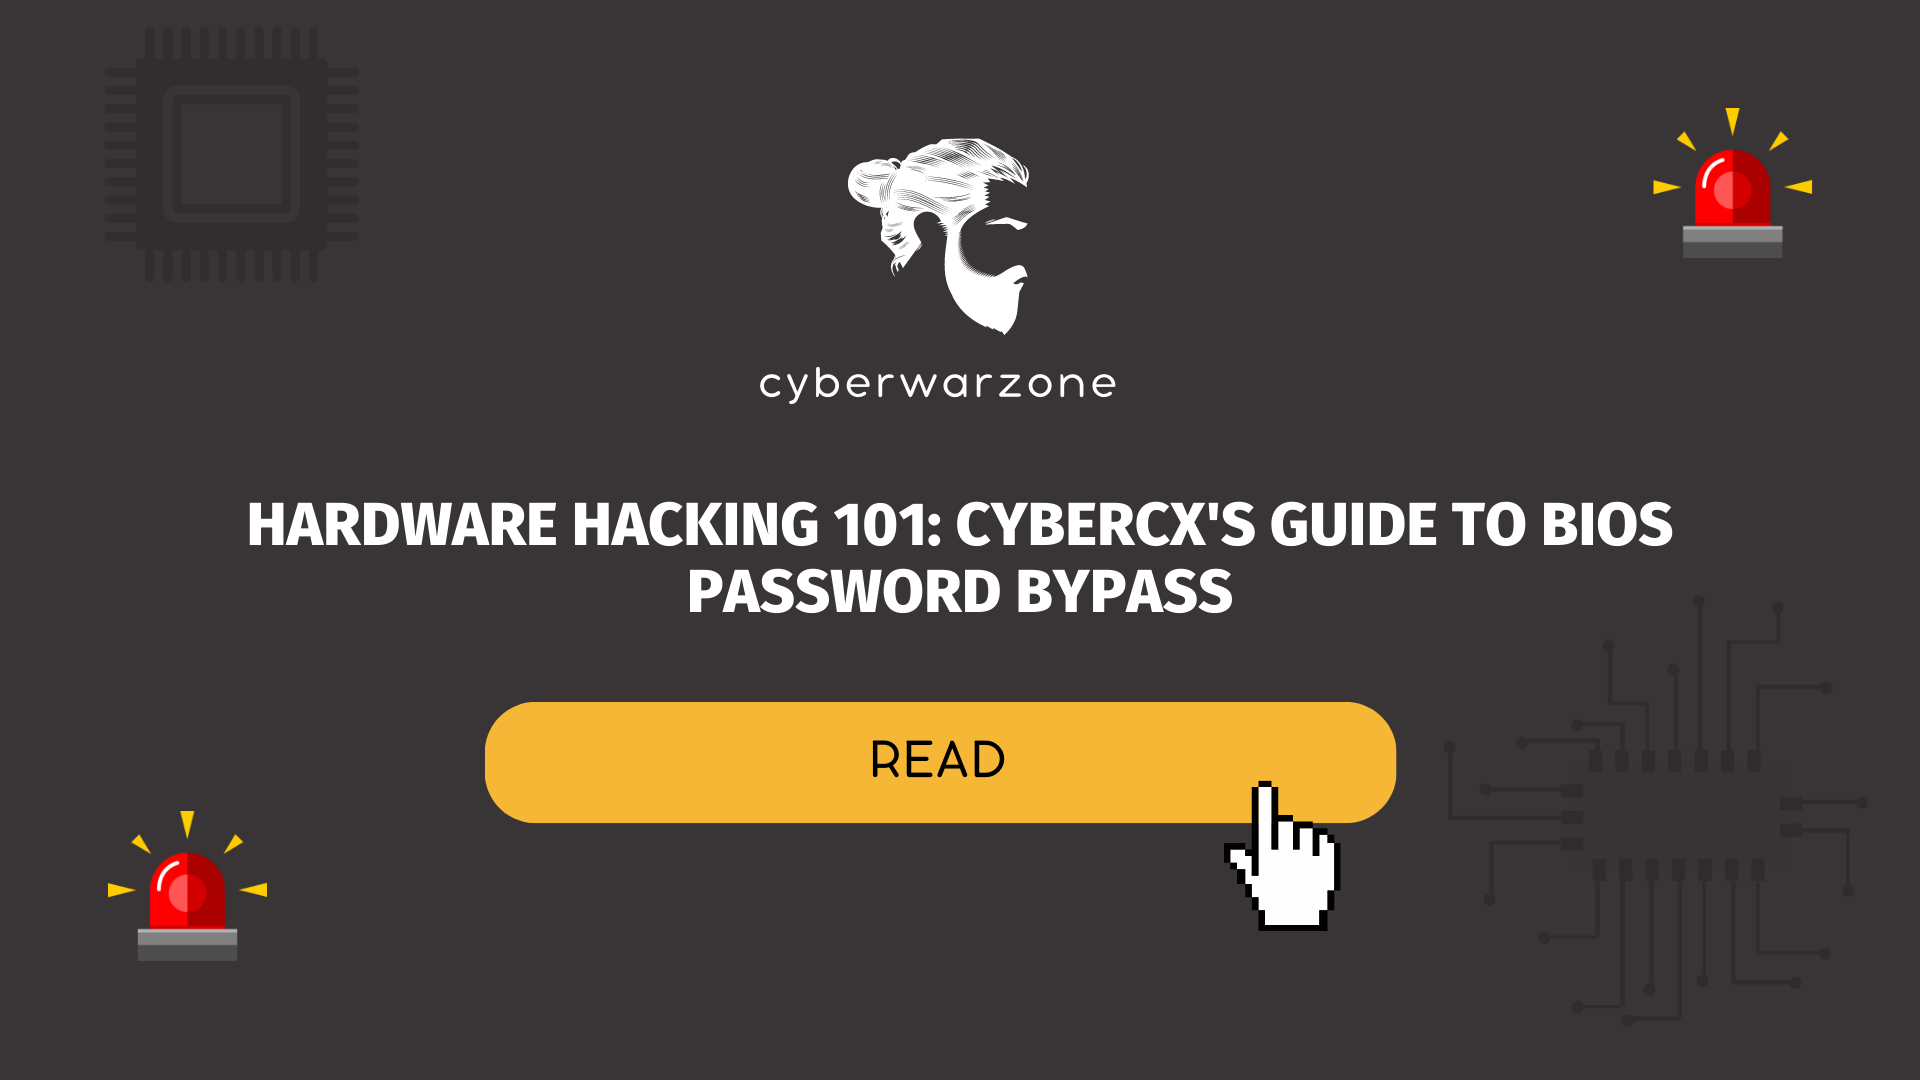 Hardware Hacking 101: CyberCX's Guide to BIOS Password Bypass